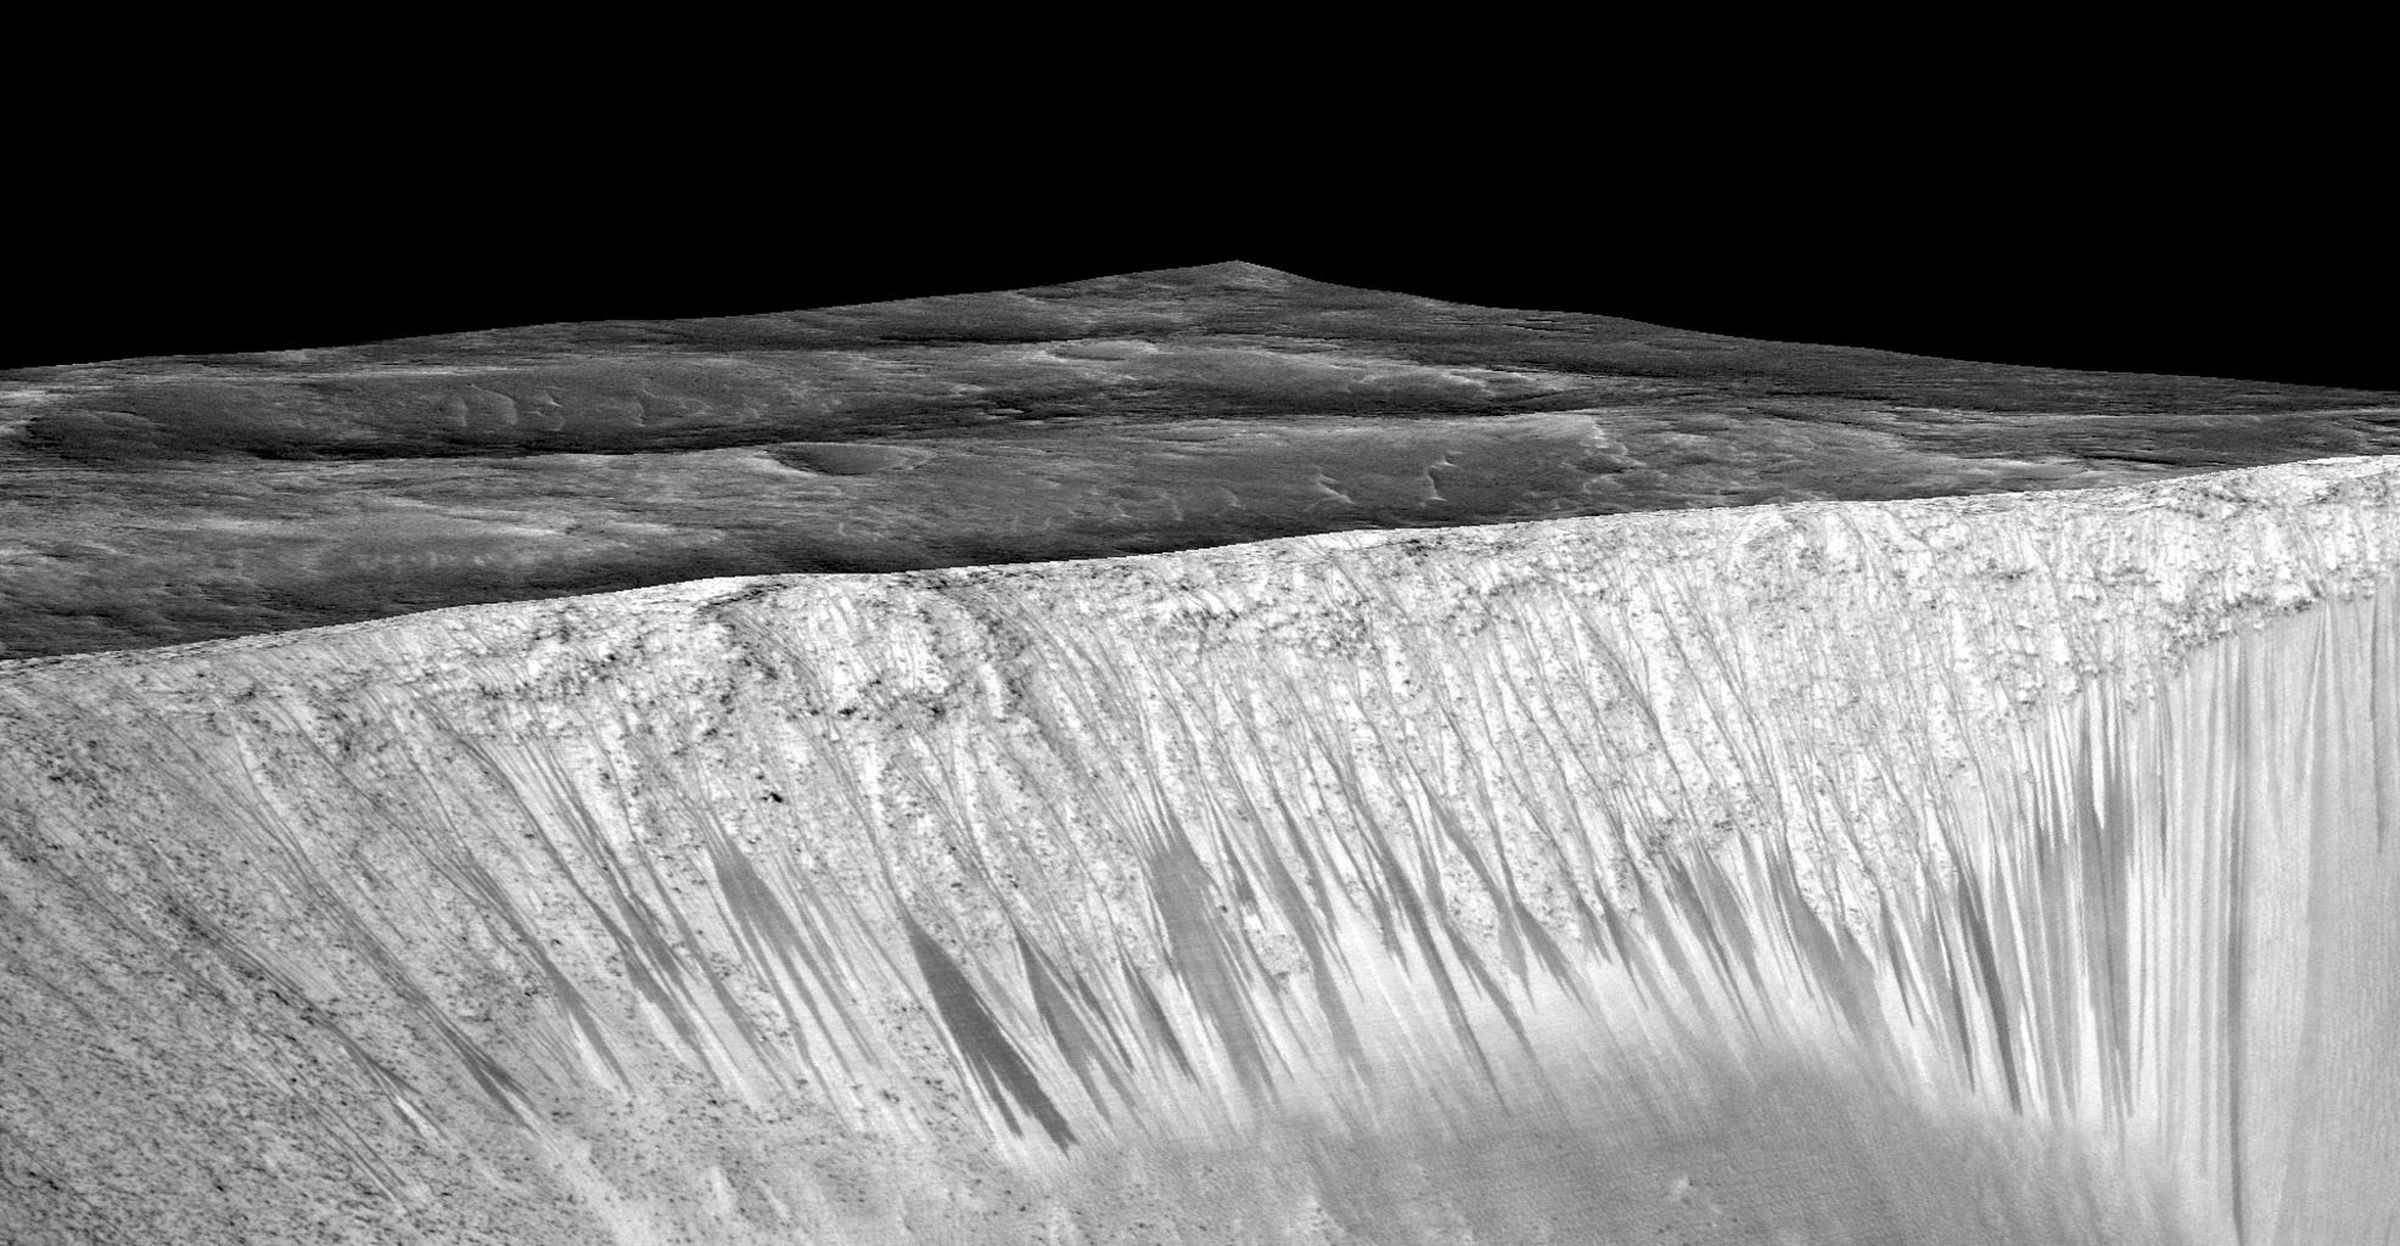 Dark streaks on Mars’ Garni Crater known as recurring slope lineae. NASA and other scientists believe these are created by flowing salty water.